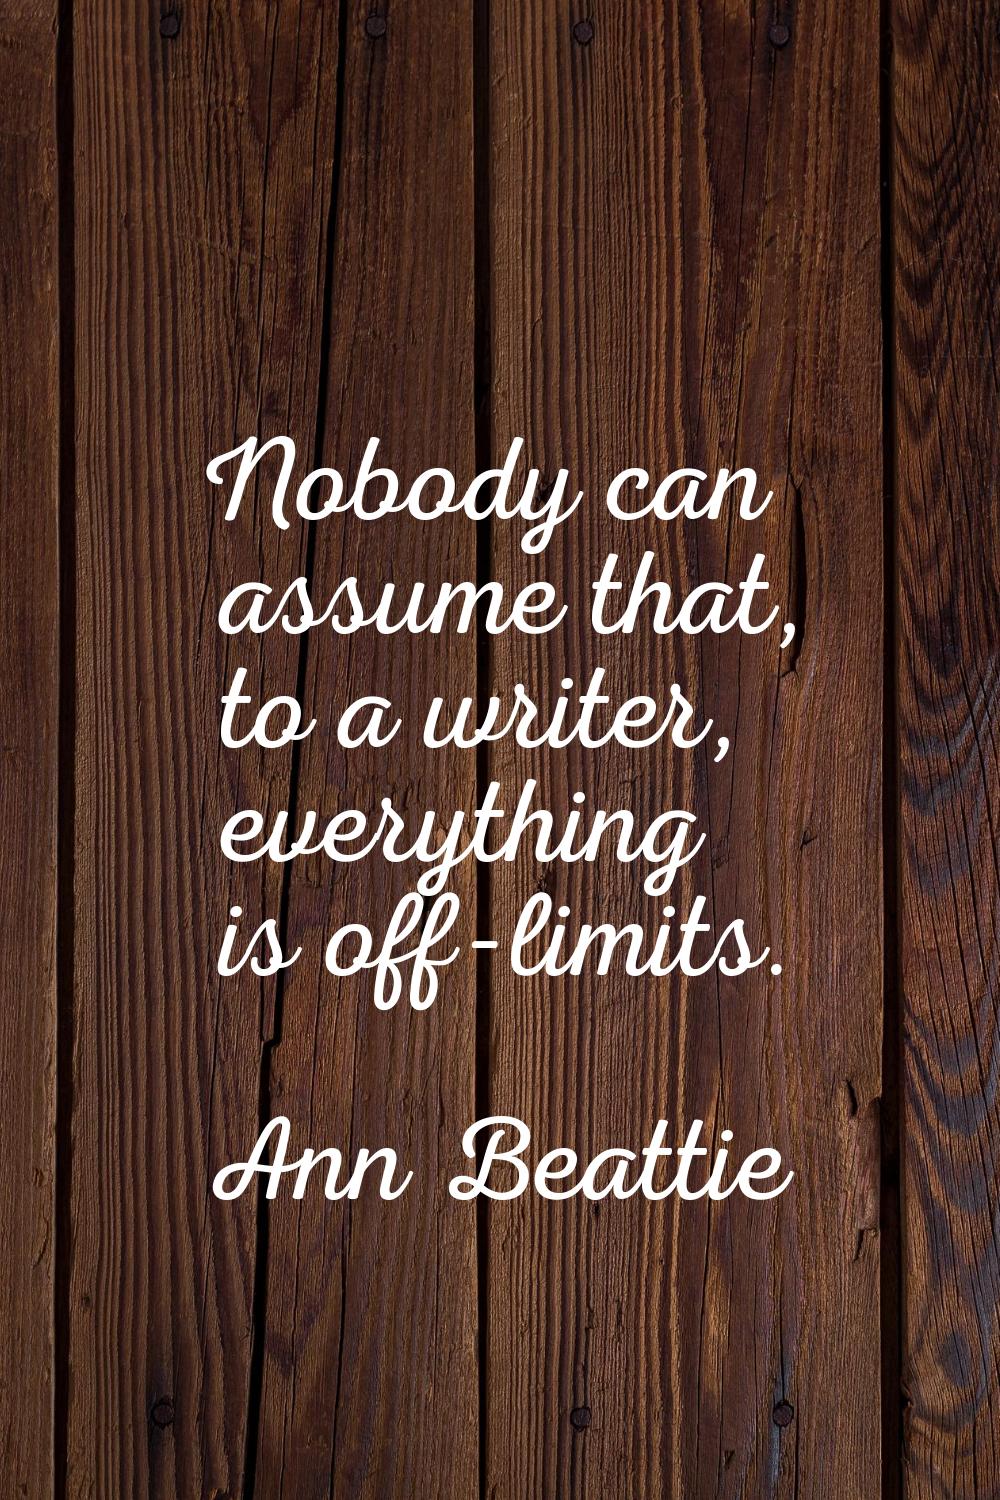 Nobody can assume that, to a writer, everything is off-limits.